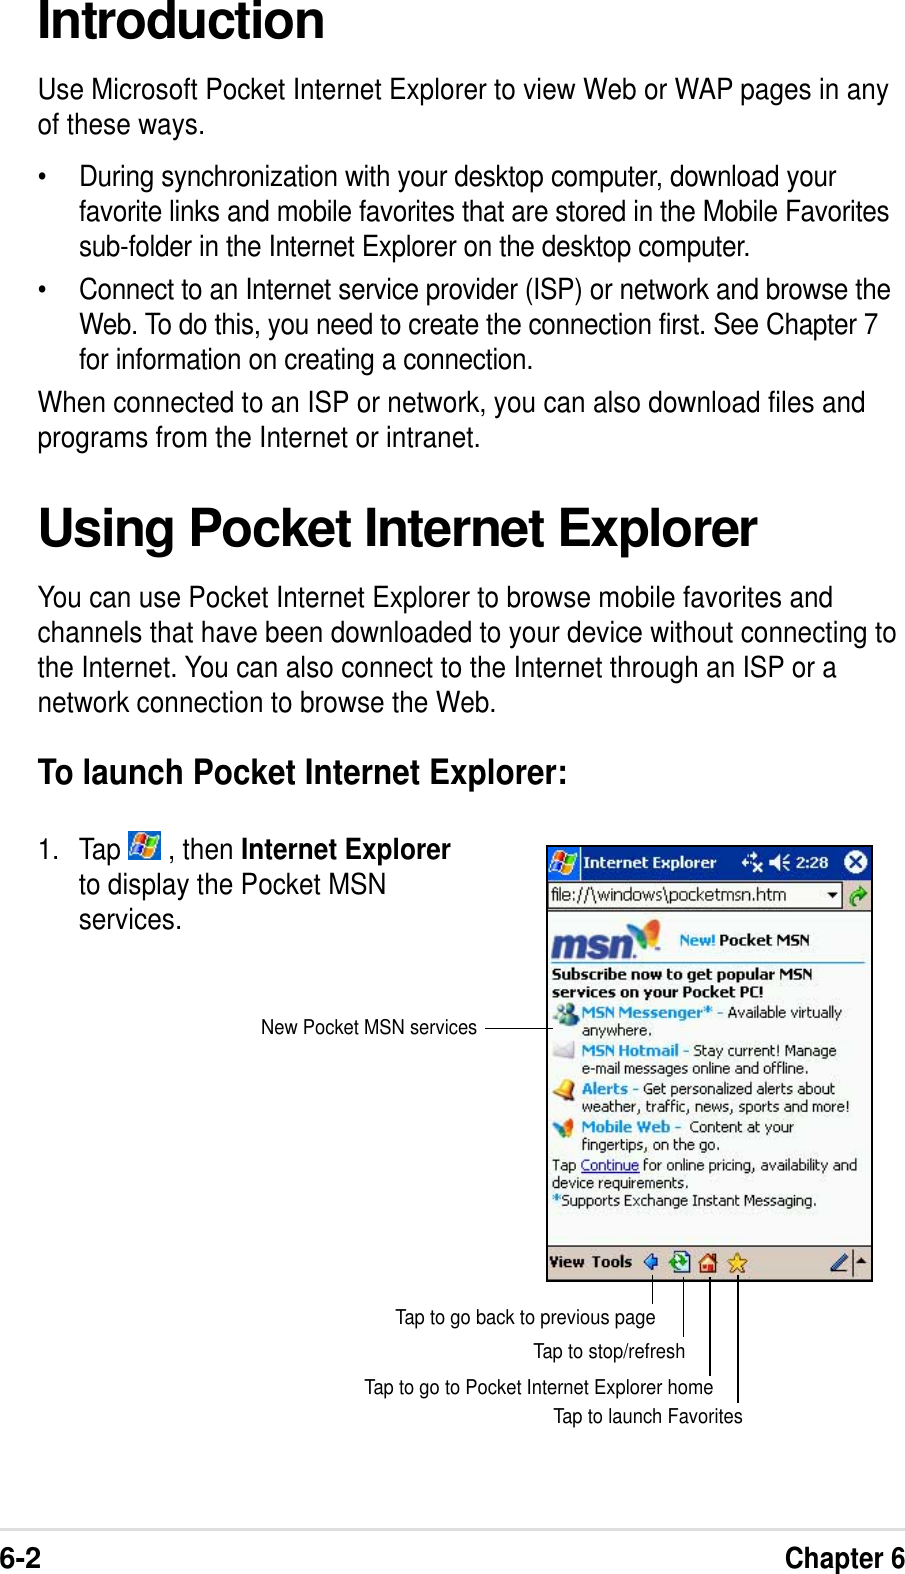 6-2Chapter 6IntroductionUse Microsoft Pocket Internet Explorer to view Web or WAP pages in anyof these ways.•During synchronization with your desktop computer, download yourfavorite links and mobile favorites that are stored in the Mobile Favoritessub-folder in the Internet Explorer on the desktop computer.•Connect to an Internet service provider (ISP) or network and browse theWeb. To do this, you need to create the connection first. See Chapter 7for information on creating a connection.When connected to an ISP or network, you can also download files andprograms from the Internet or intranet.Using Pocket Internet ExplorerYou can use Pocket Internet Explorer to browse mobile favorites andchannels that have been downloaded to your device without connecting tothe Internet. You can also connect to the Internet through an ISP or anetwork connection to browse the Web.To launch Pocket Internet Explorer:1. Tap   , then Internet Explorerto display the Pocket MSNservices.Tap to launch FavoritesTap to go to Pocket Internet Explorer homeTap to stop/refreshTap to go back to previous pageNew Pocket MSN services